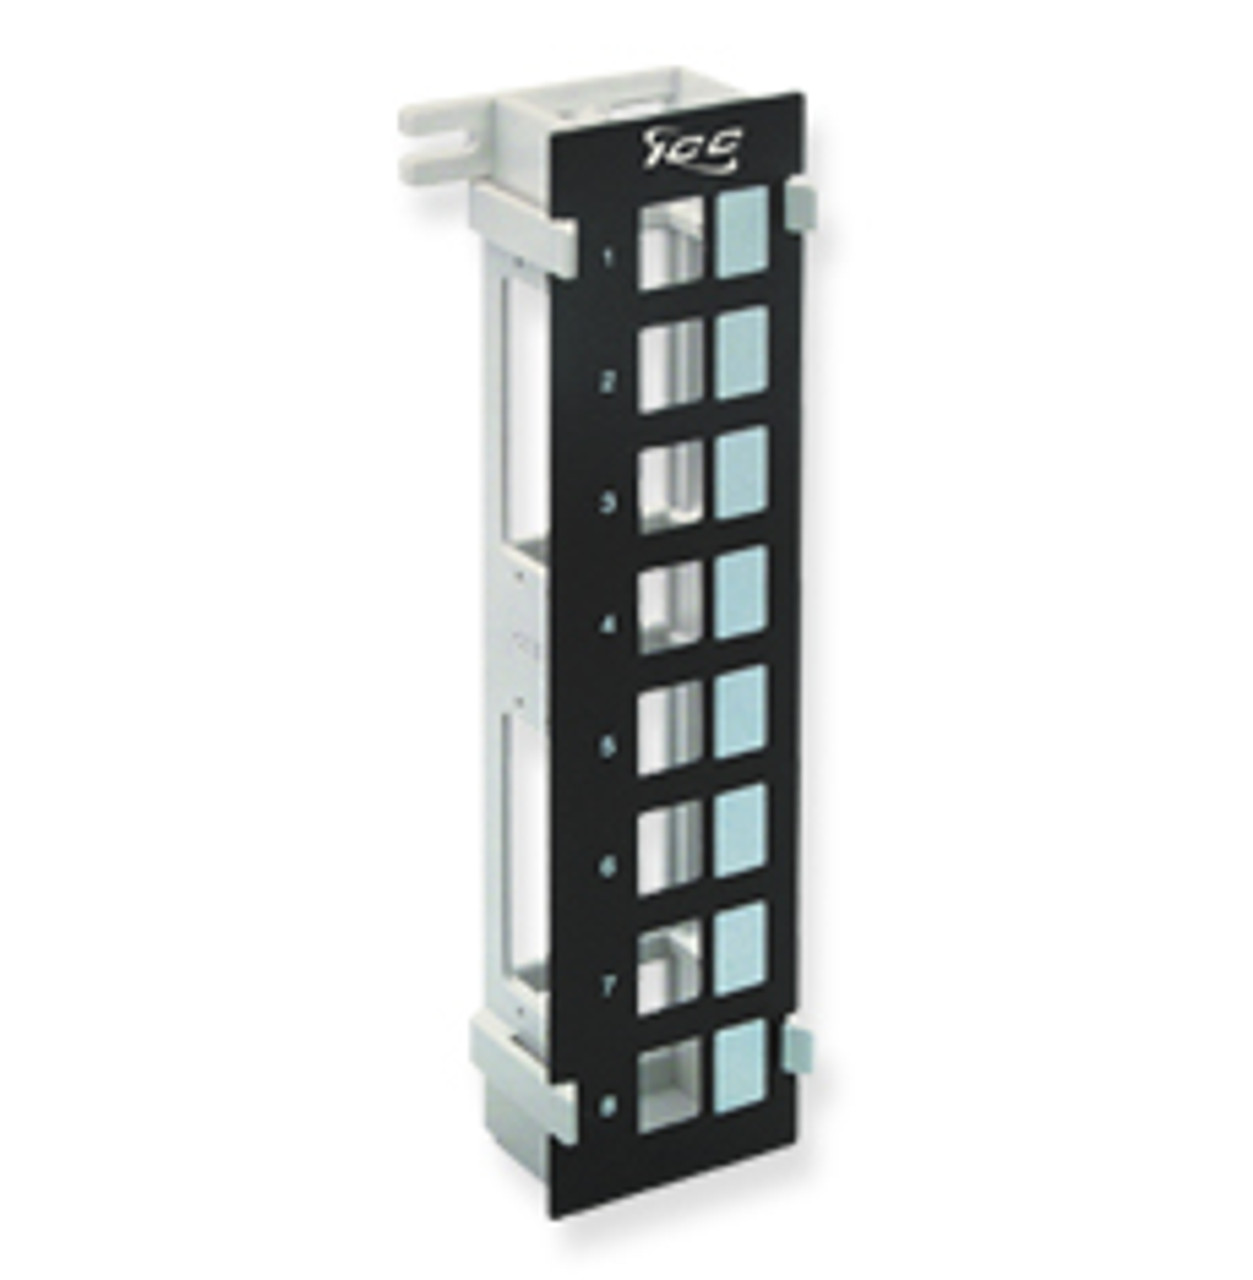 Blank Patch Panel 8 Port Vertical, w/ Wall Mounting Bracket